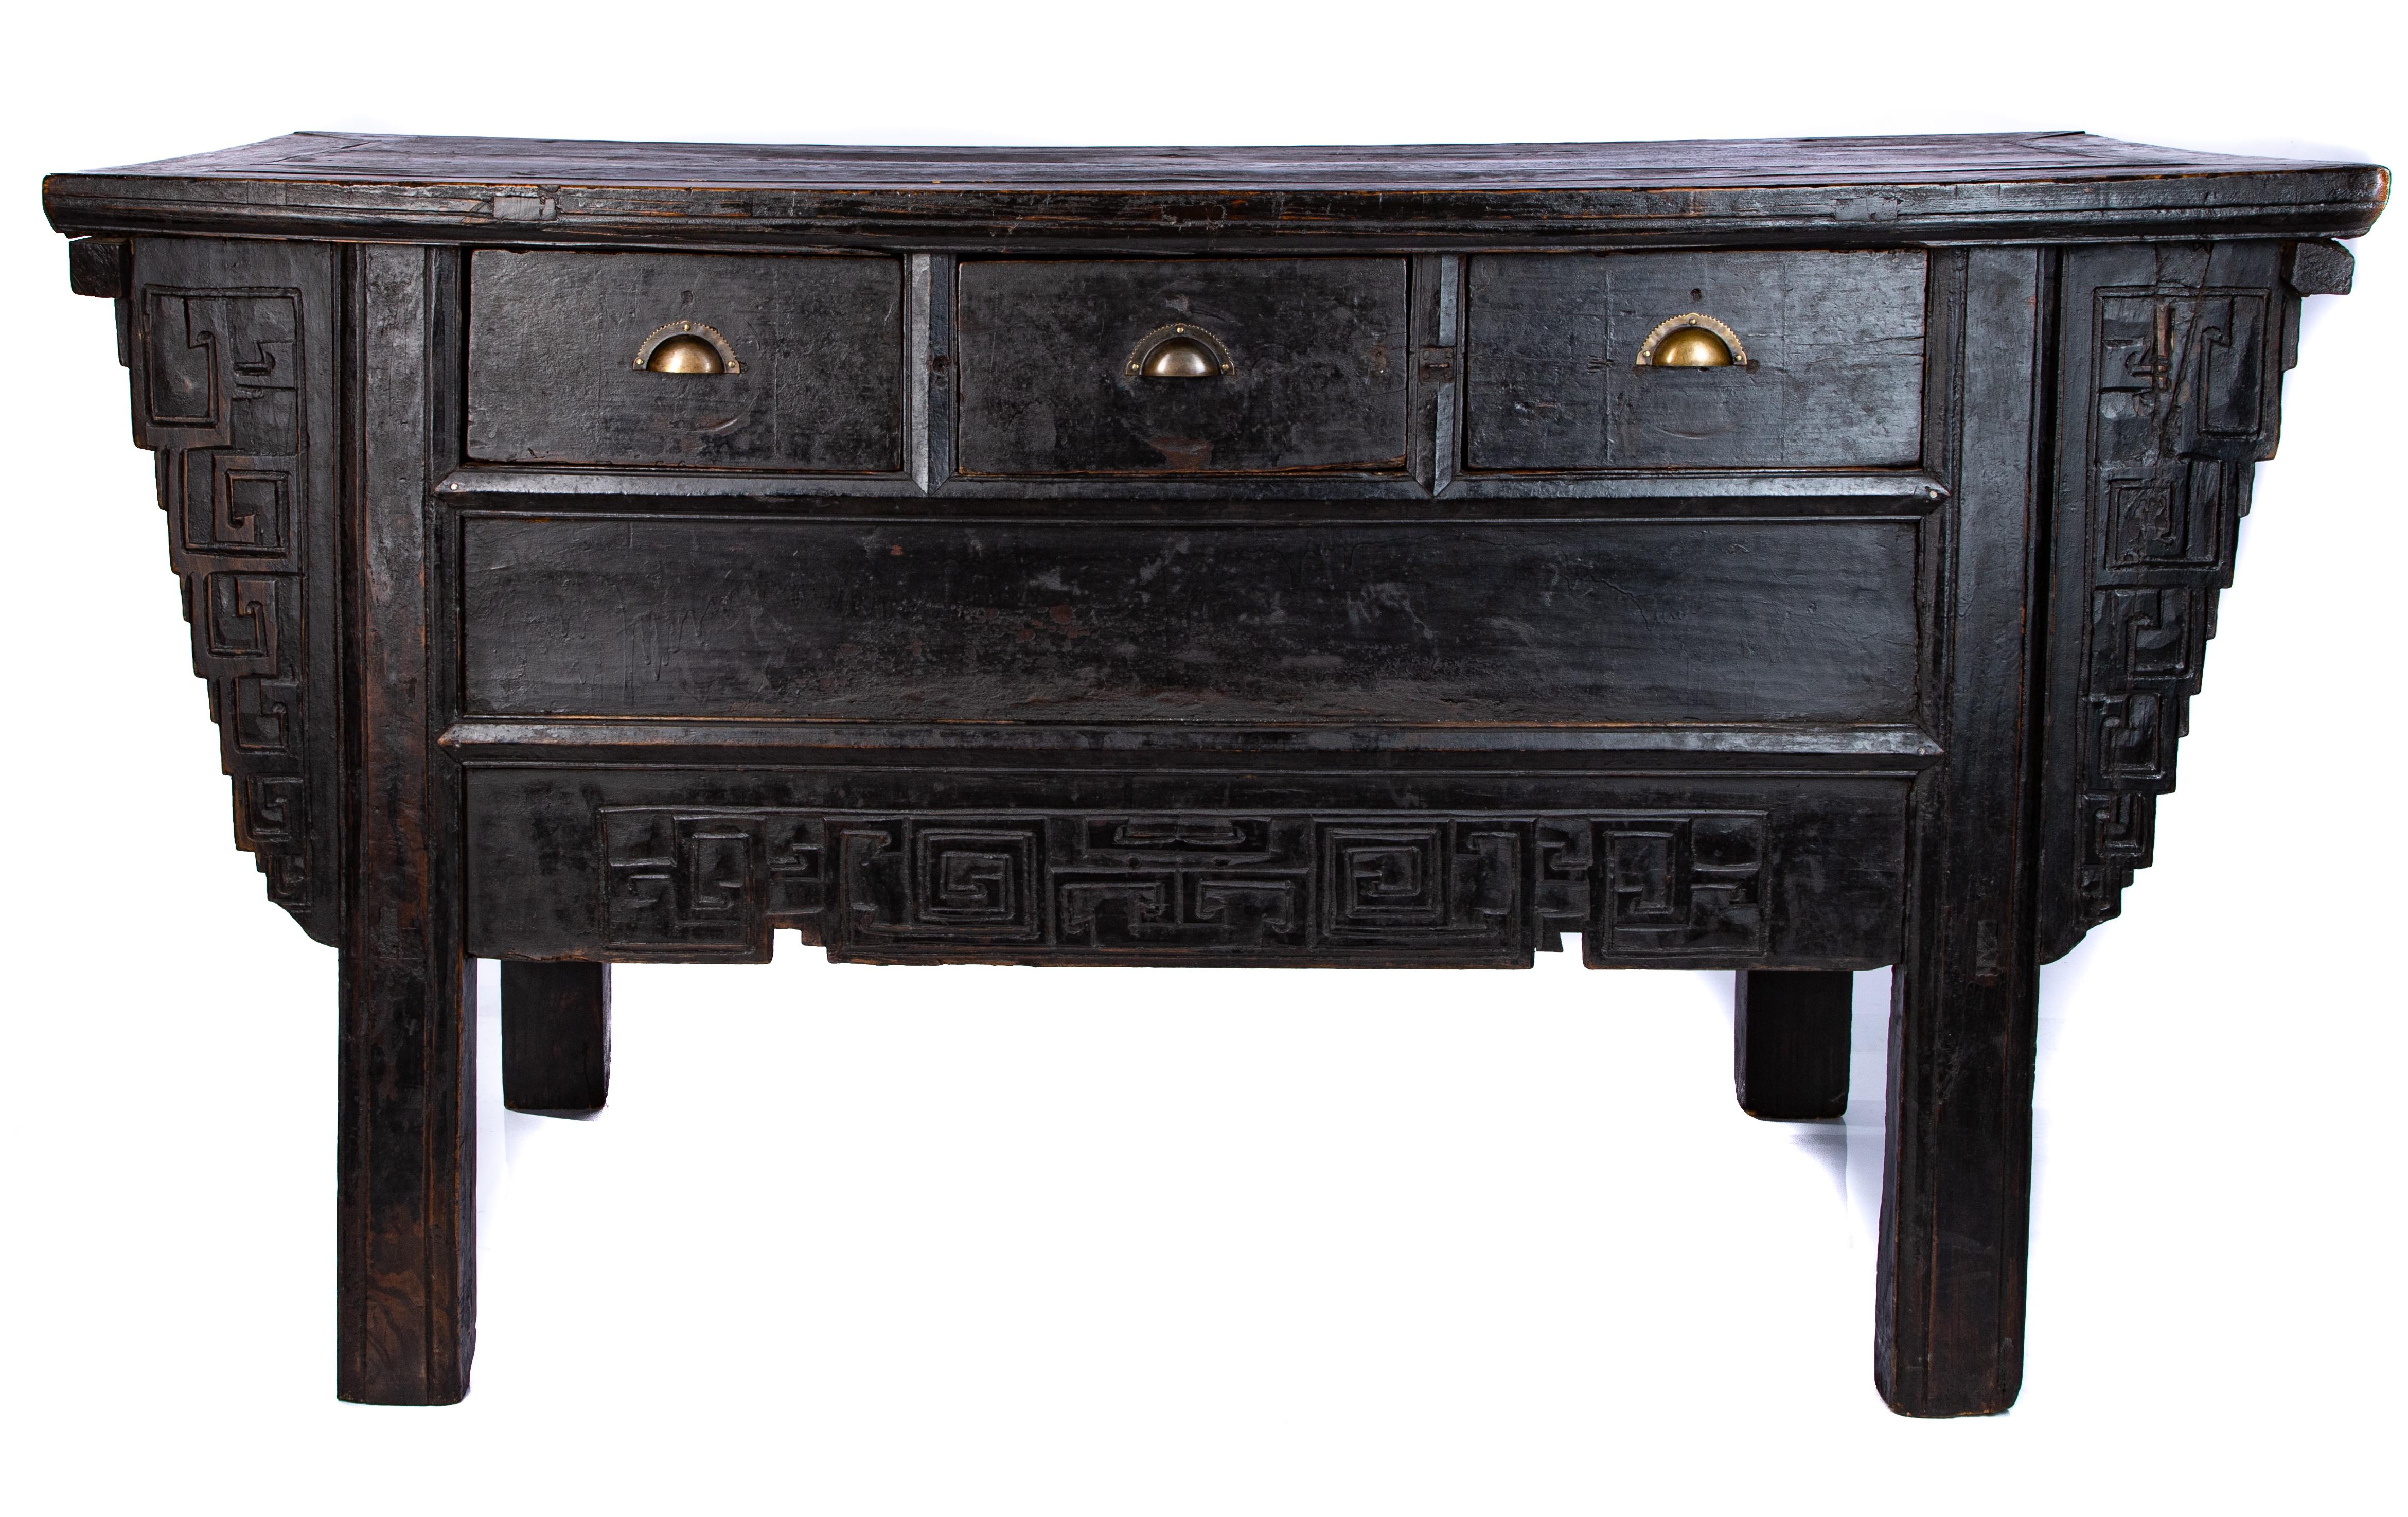 Offering this unmatchable Chinese altar table from the early 19th century. Starting on square legs rising up to gorgeous hand carved panels that flank either side, and a stretcher across the front in a geometric Chinese motif. Has three drawers with